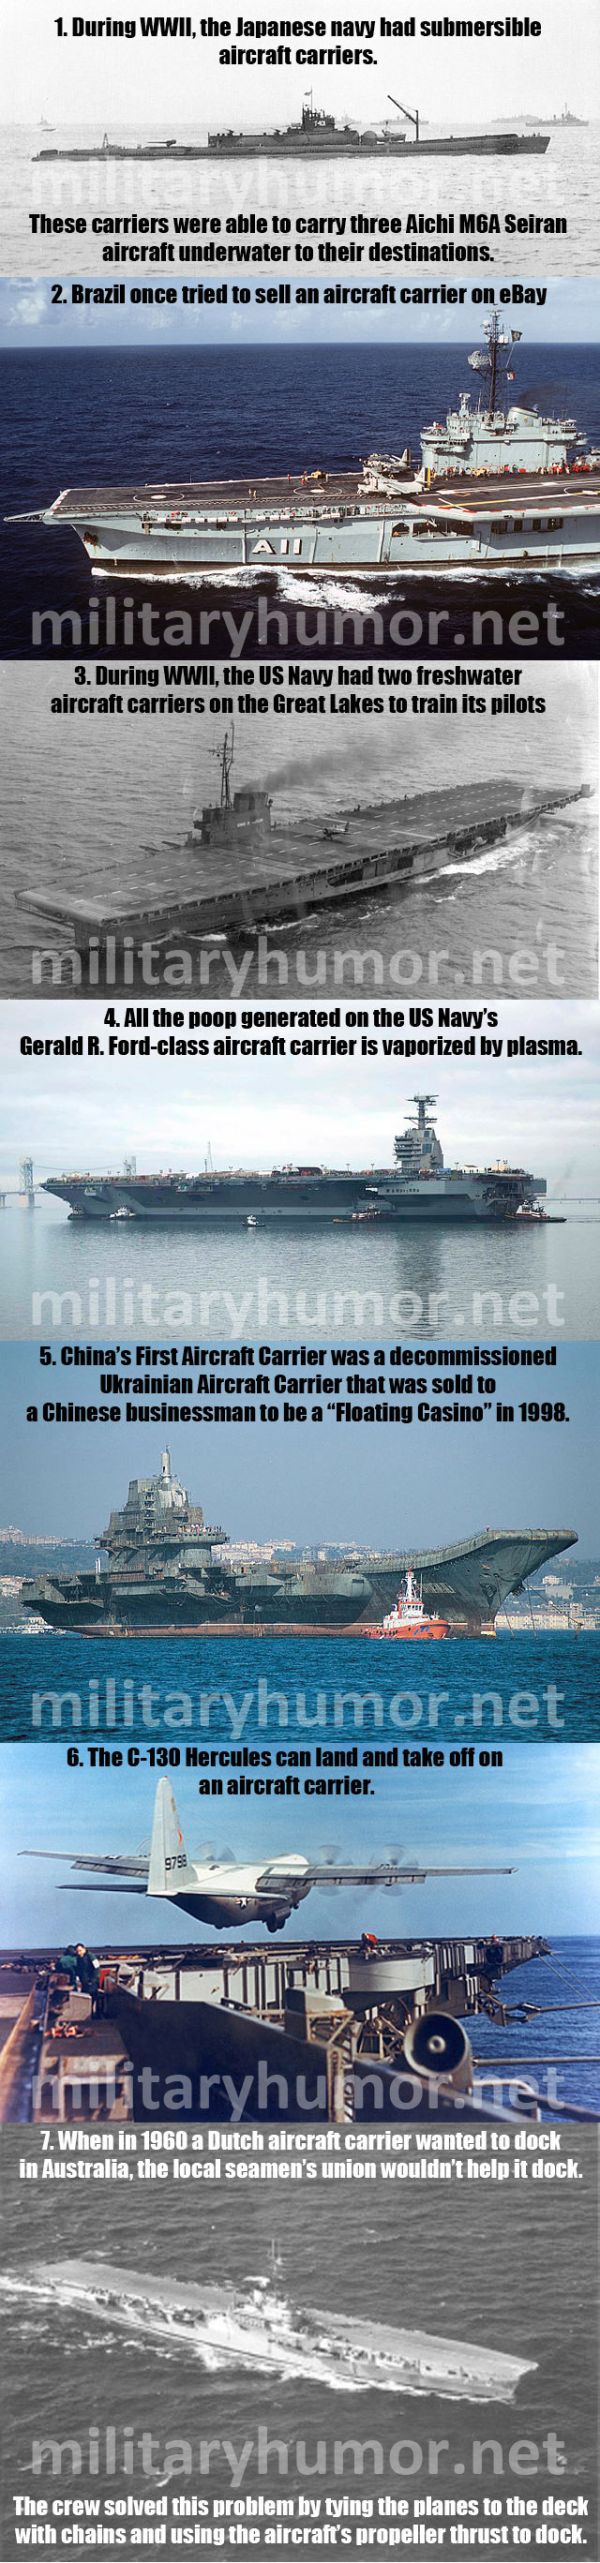 Amazing Facts About Aircraft Carriers - Military Humor